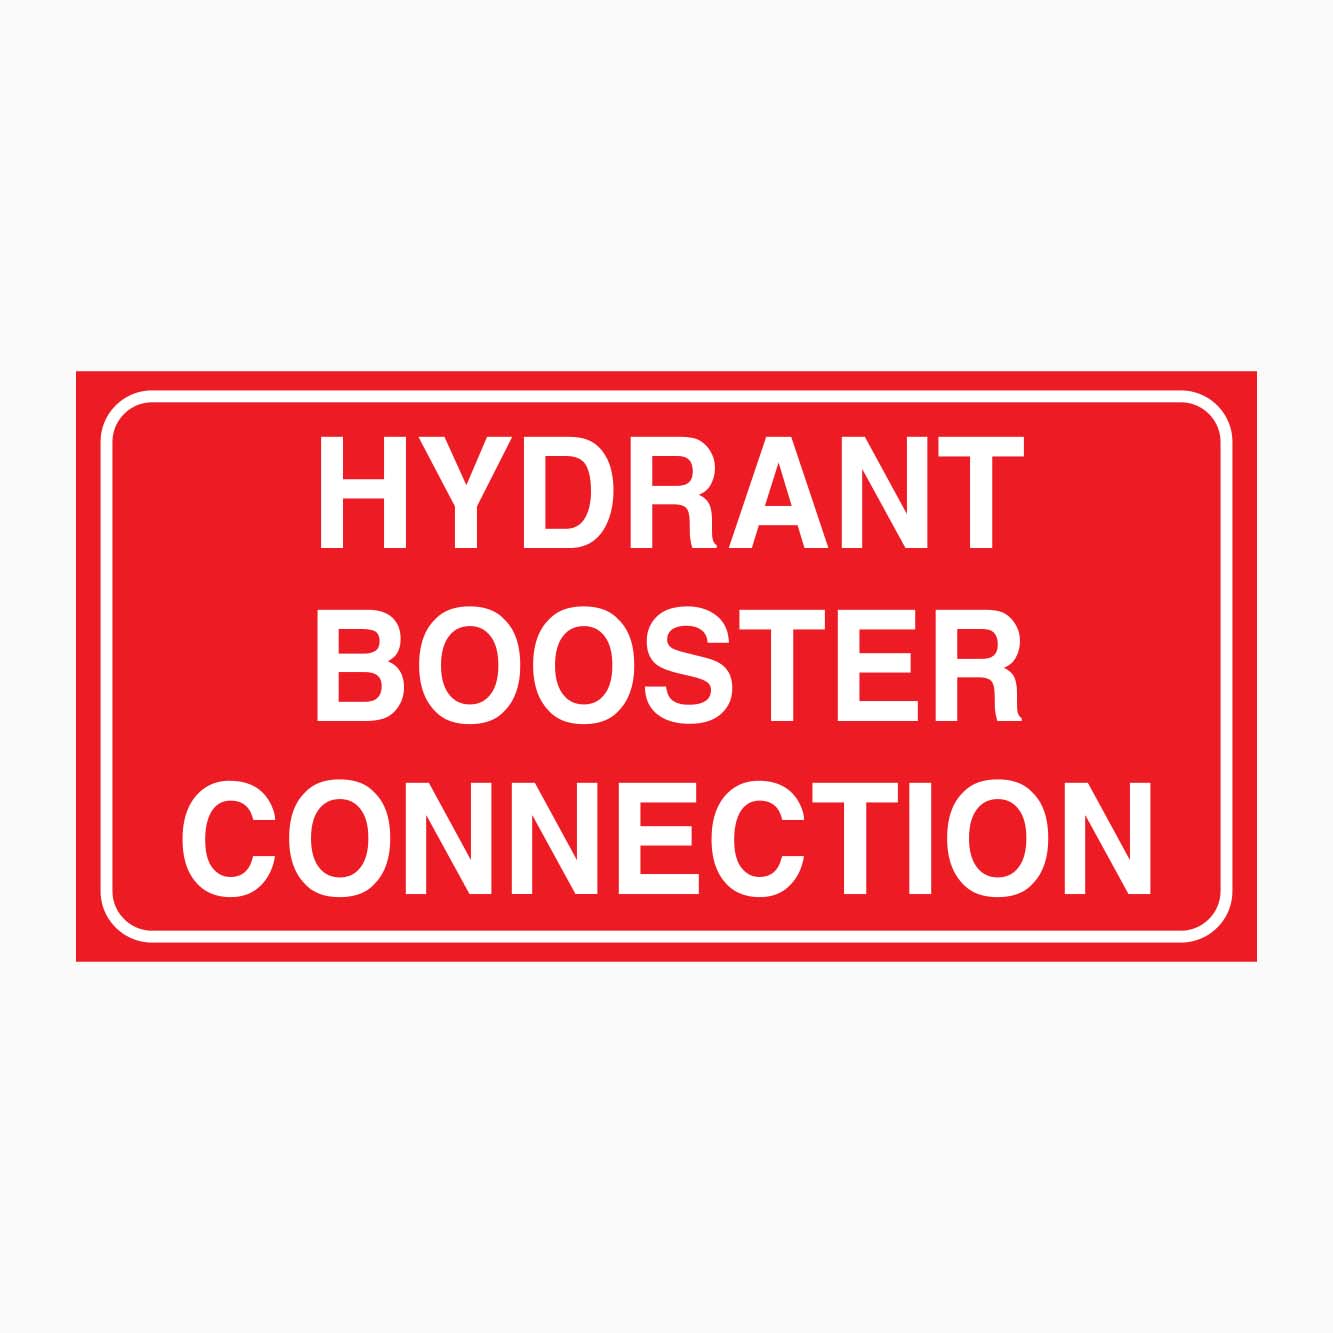 HYDRANT BOOSTER CONNECTION SIGN - GET SIGNS